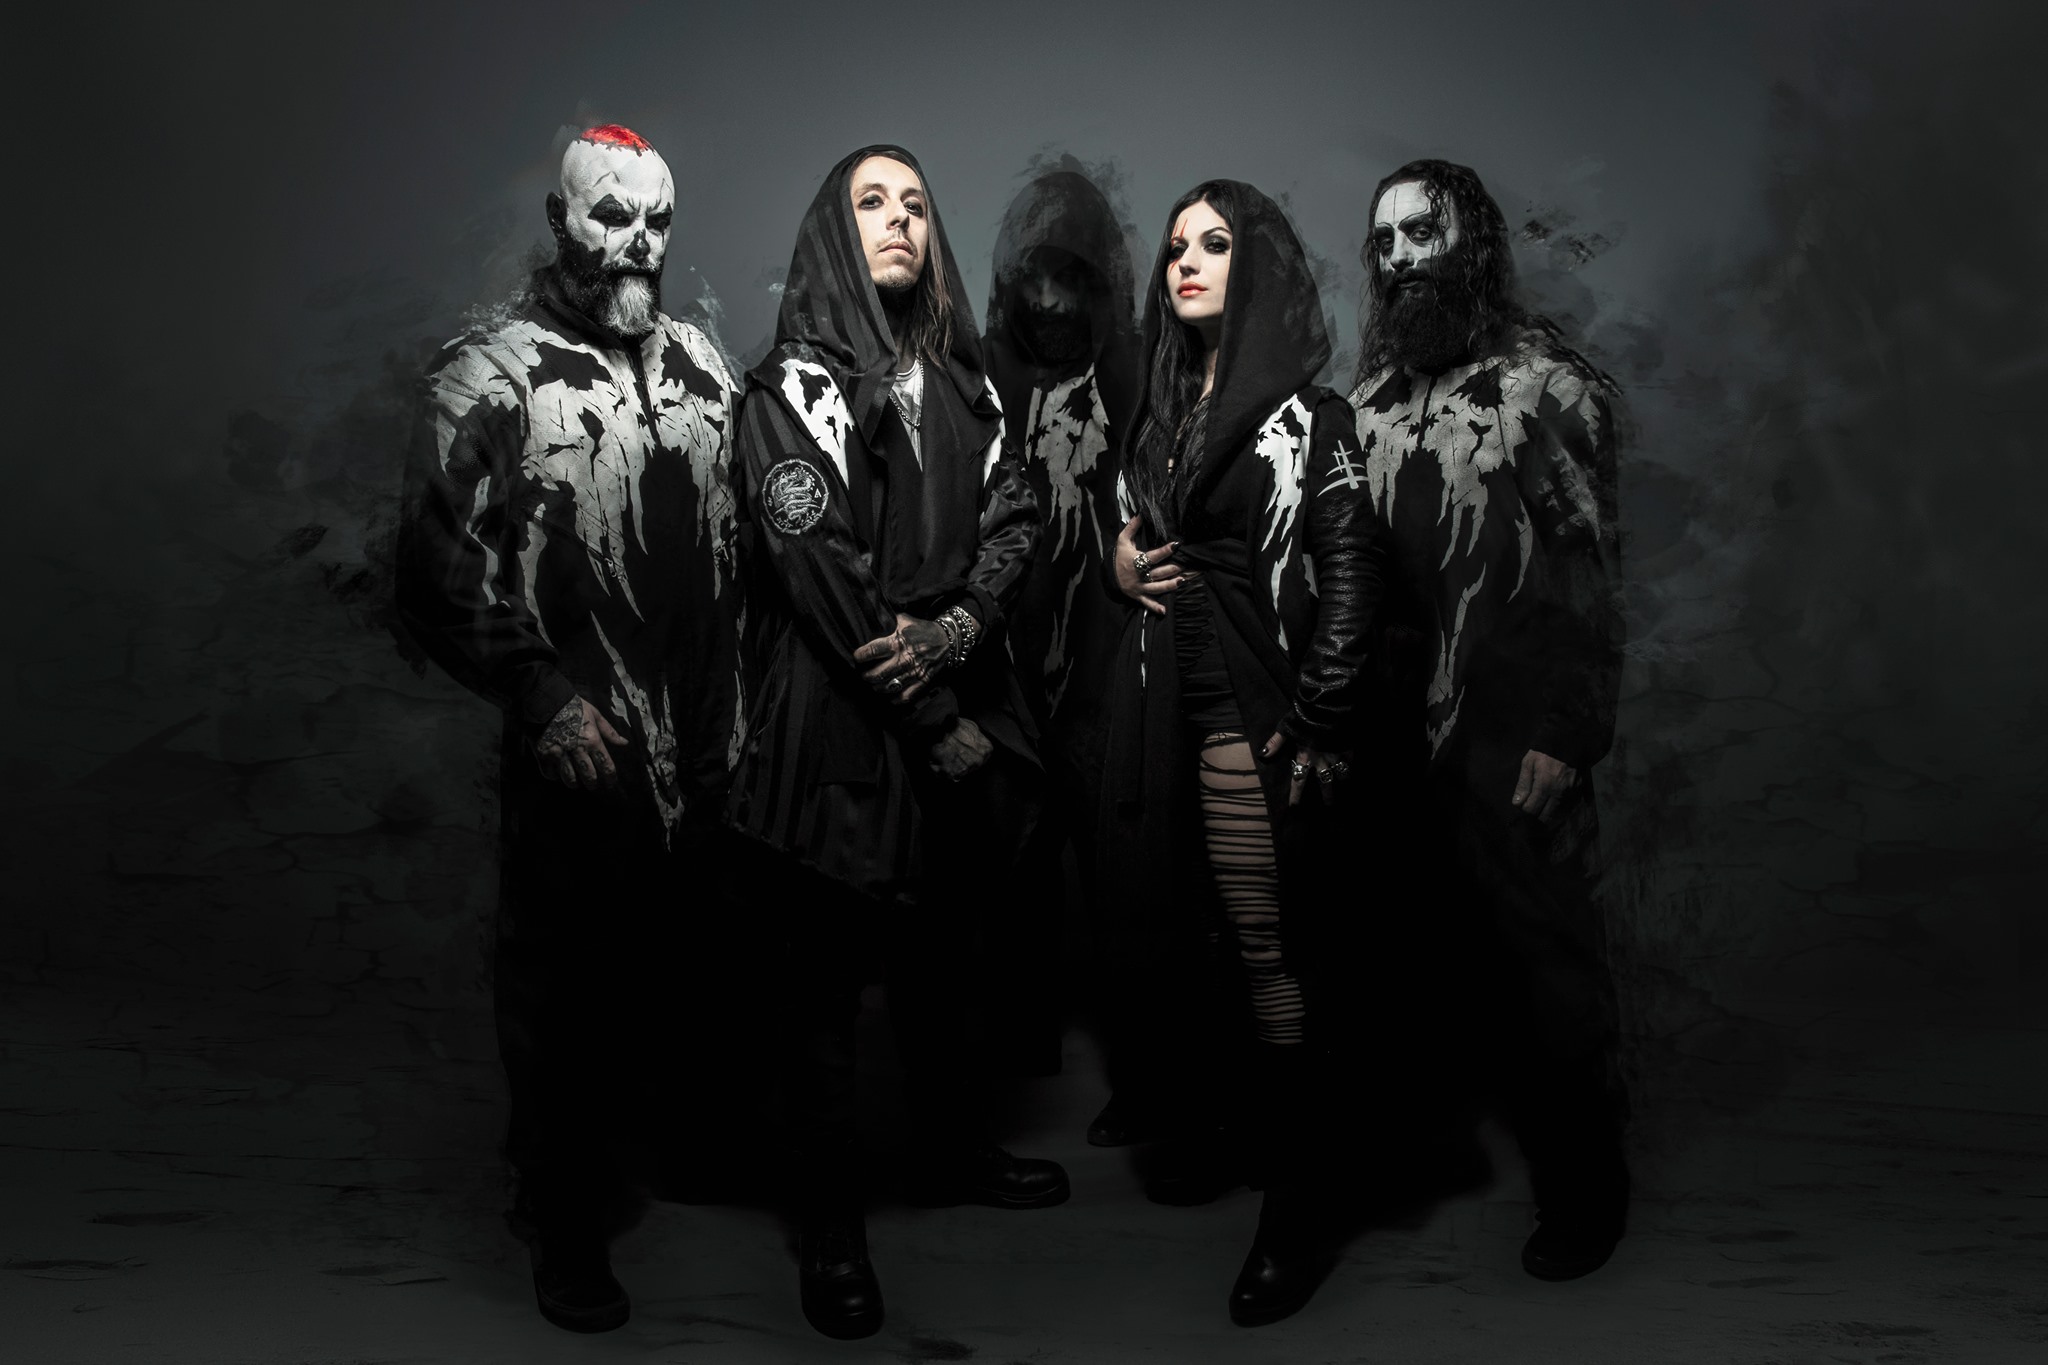 LACUNA COIL Announce North American Tour with APOCALYPTICA